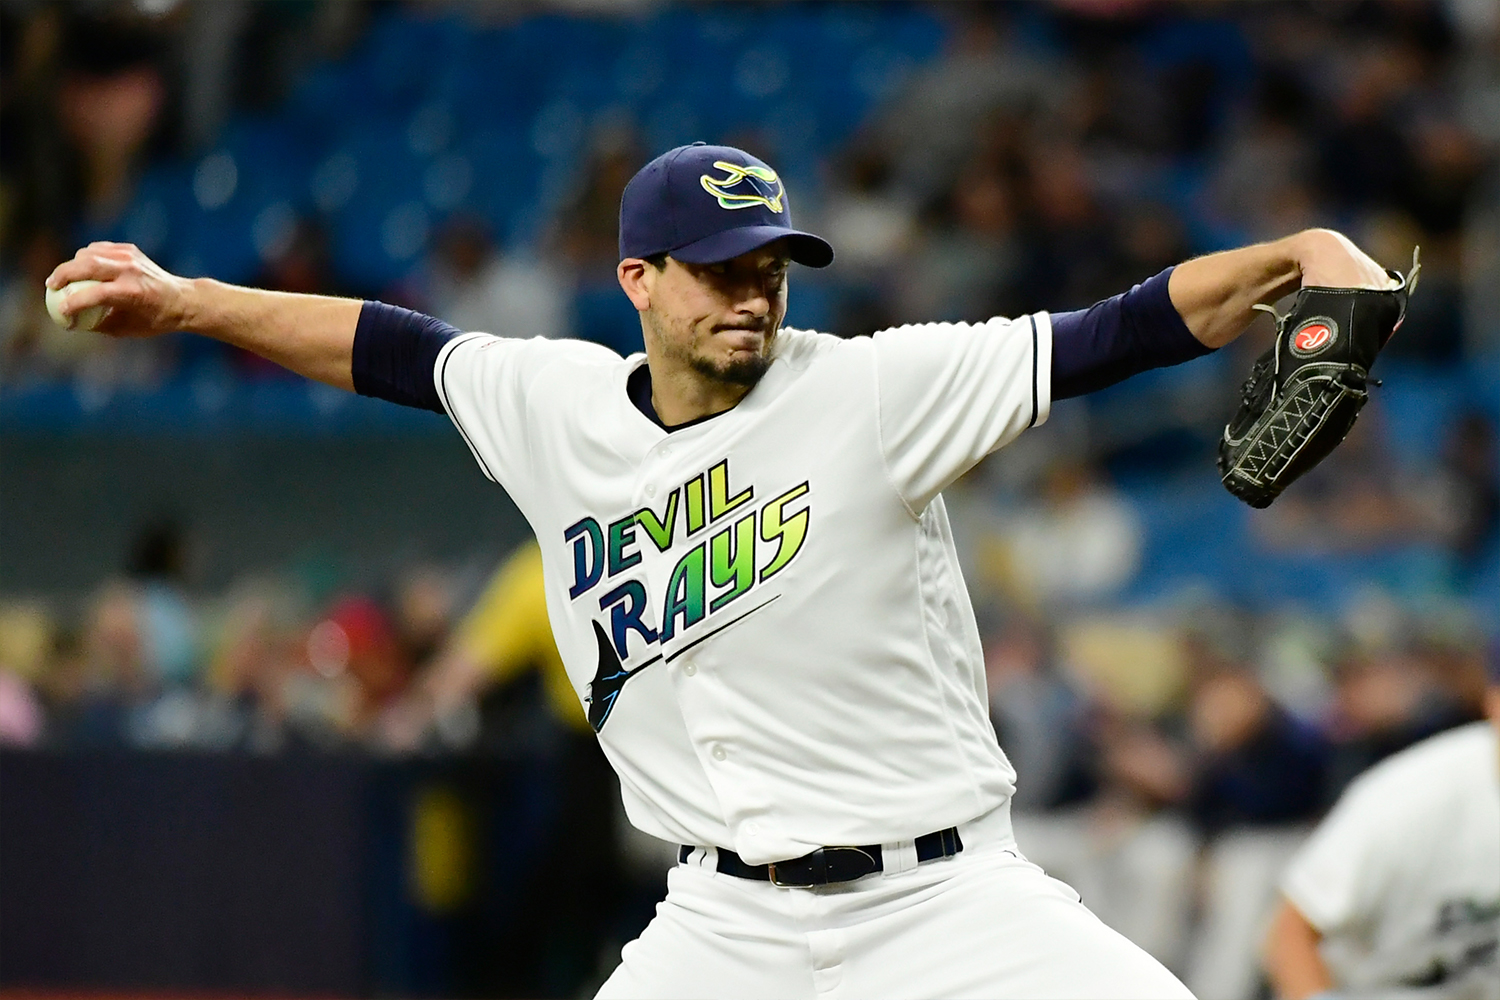 Charlie Morton #50 of the Tampa Bay Rays delivers a pitch in the first inning against the Boston Red Sox at Tropicana Field on April 20, 2019